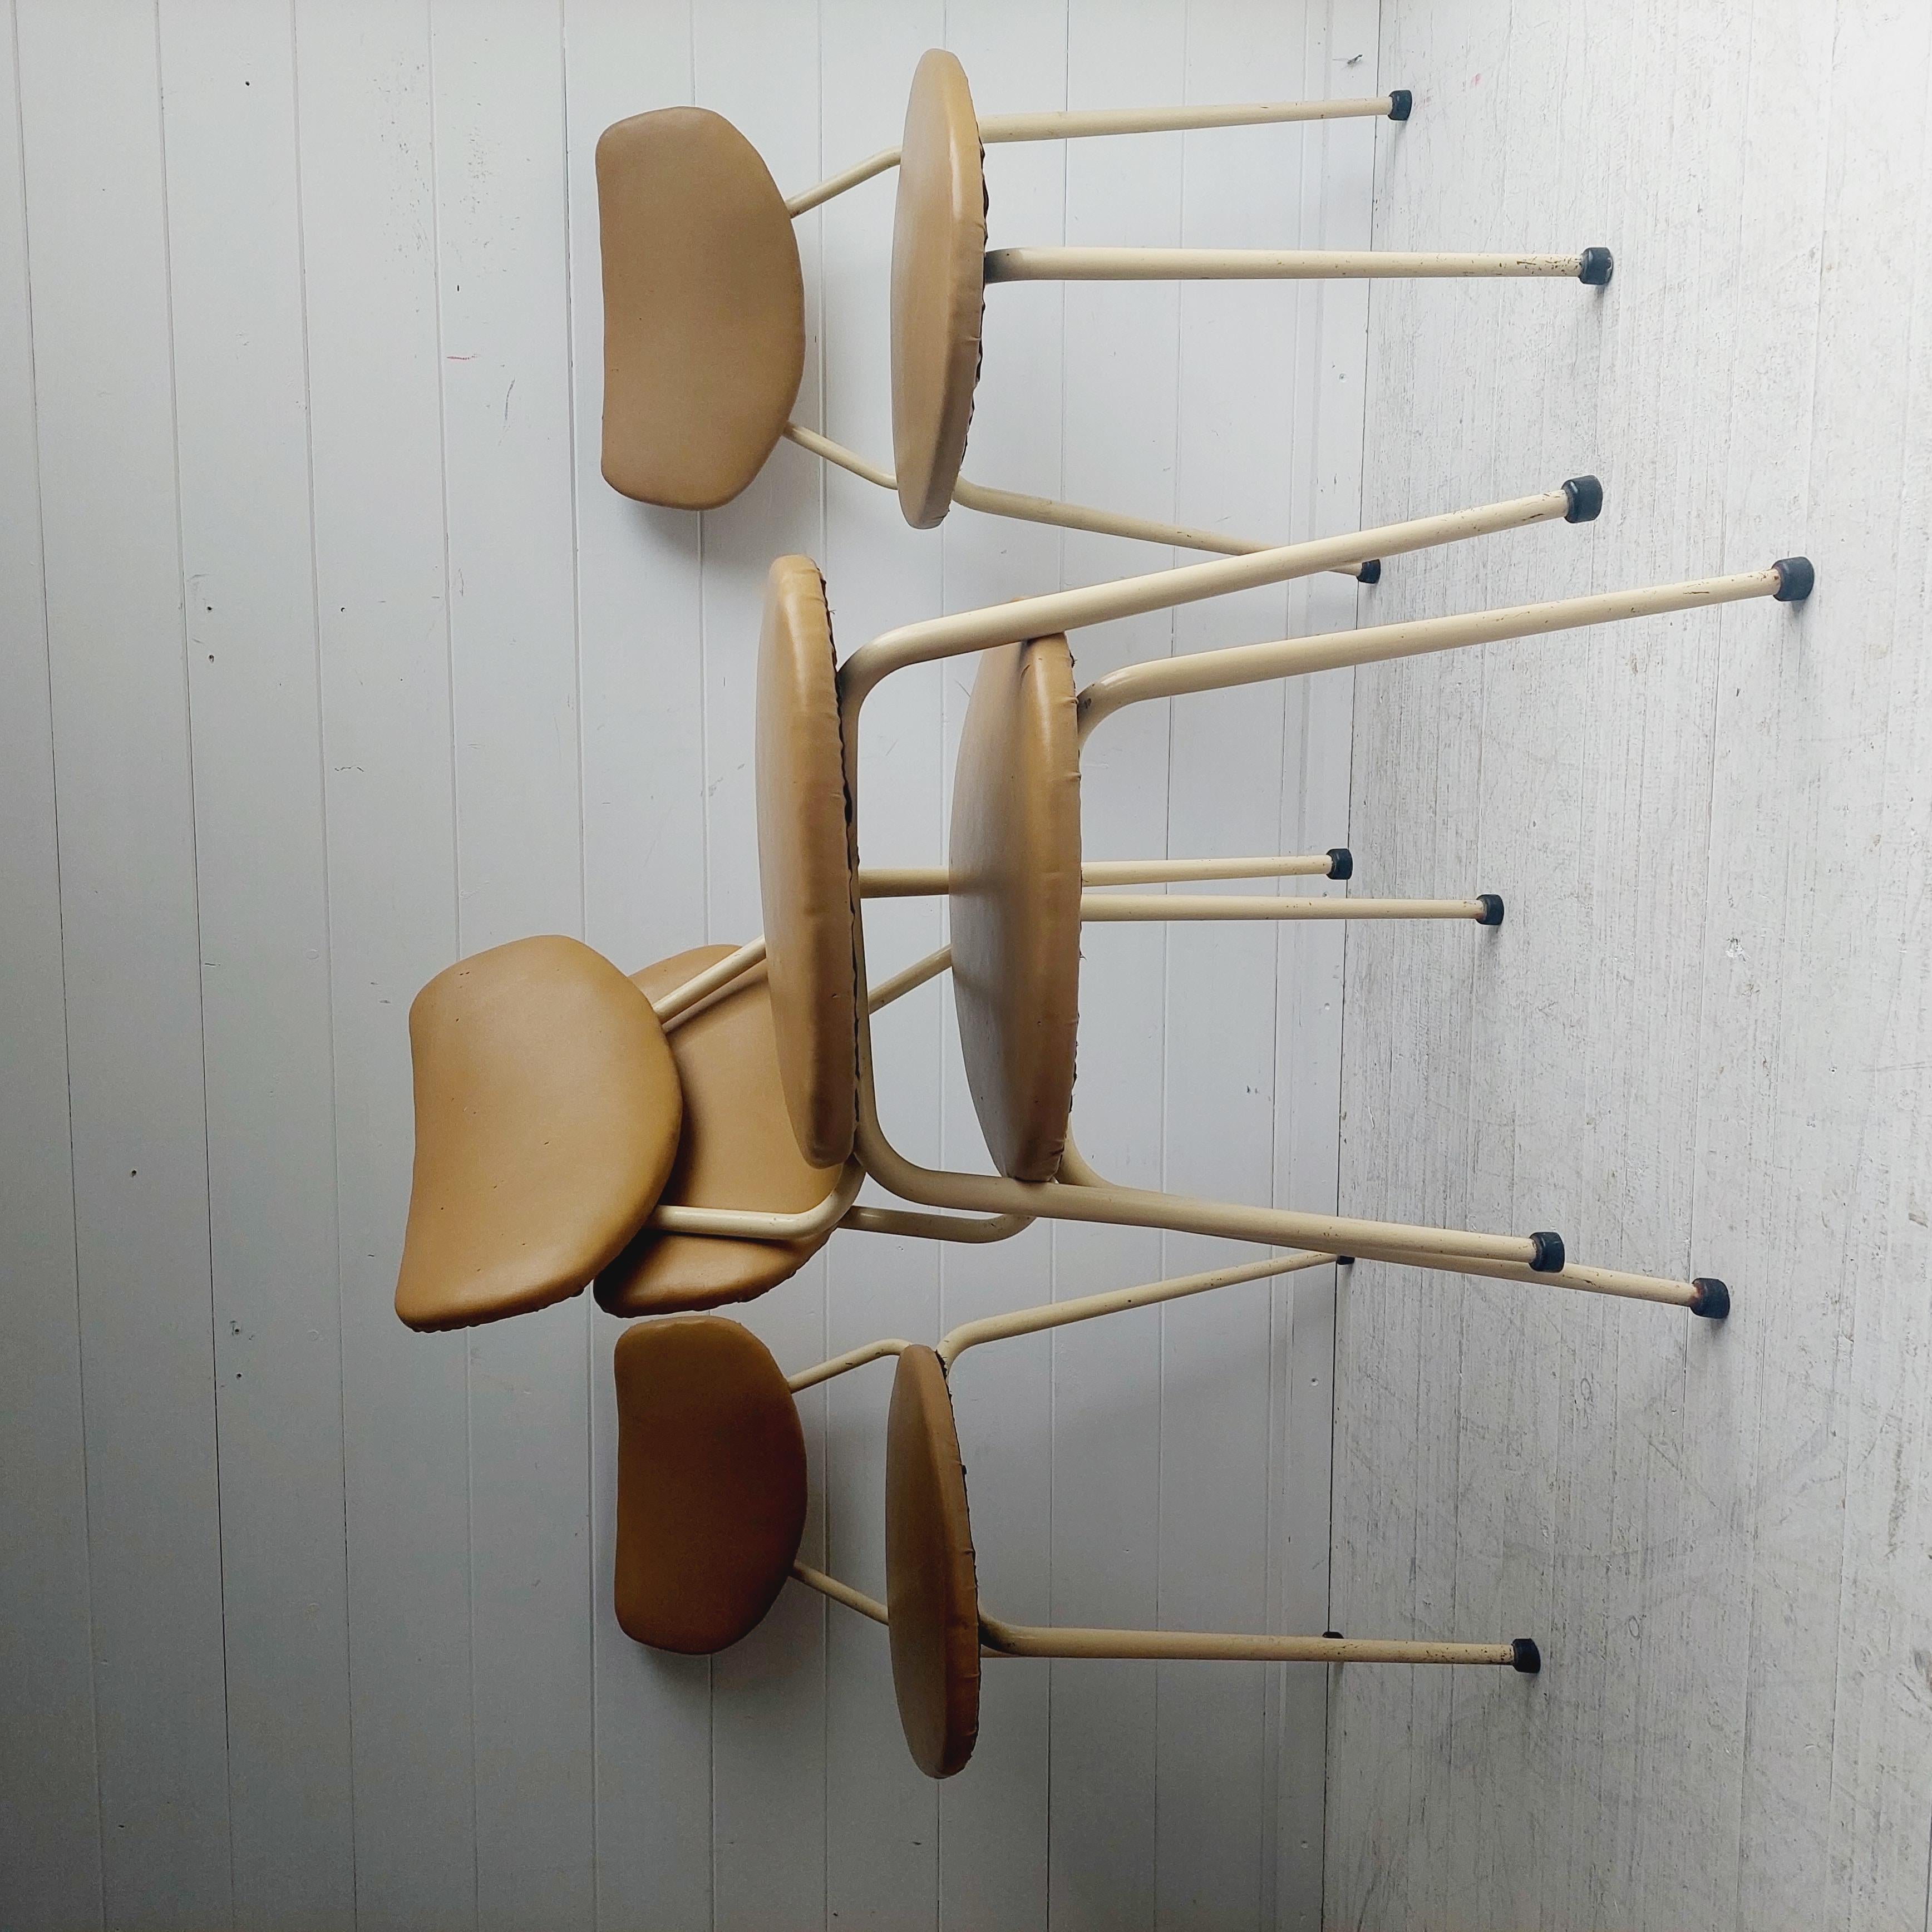 Set of 4 very retro and unique dining chairs.
 
Metal mid century tubular stacking chairs. 
Vinyl seats and backs. 
Original paint still intact. 
Very super cool vintage chairs.
These chairs were made in England by Rel

Based on the Dot stool